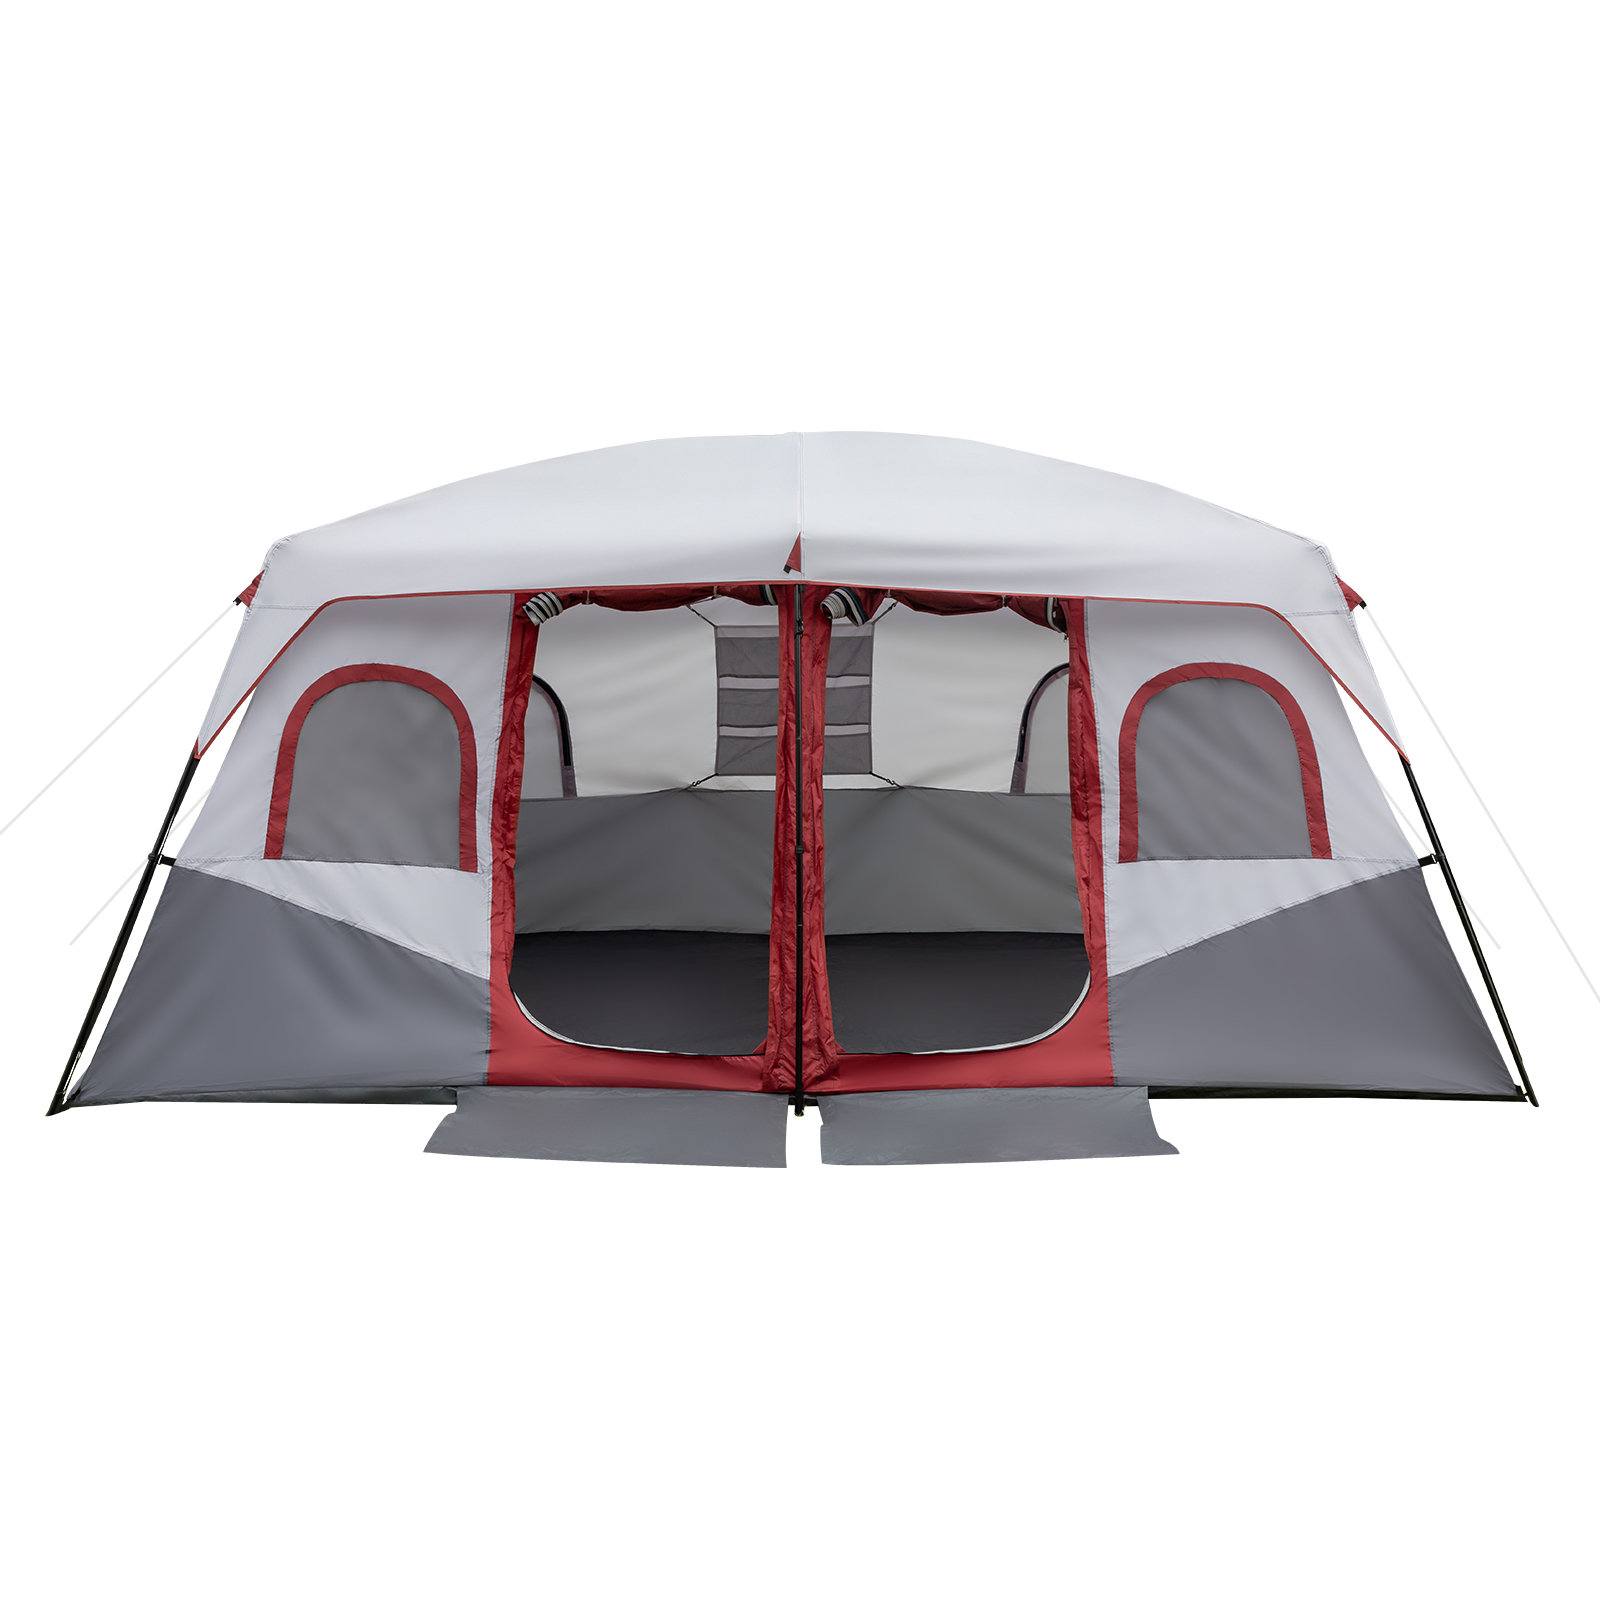 Ozark Trail 10-Person Straight Wall Cabin Tent Brand New for Sale